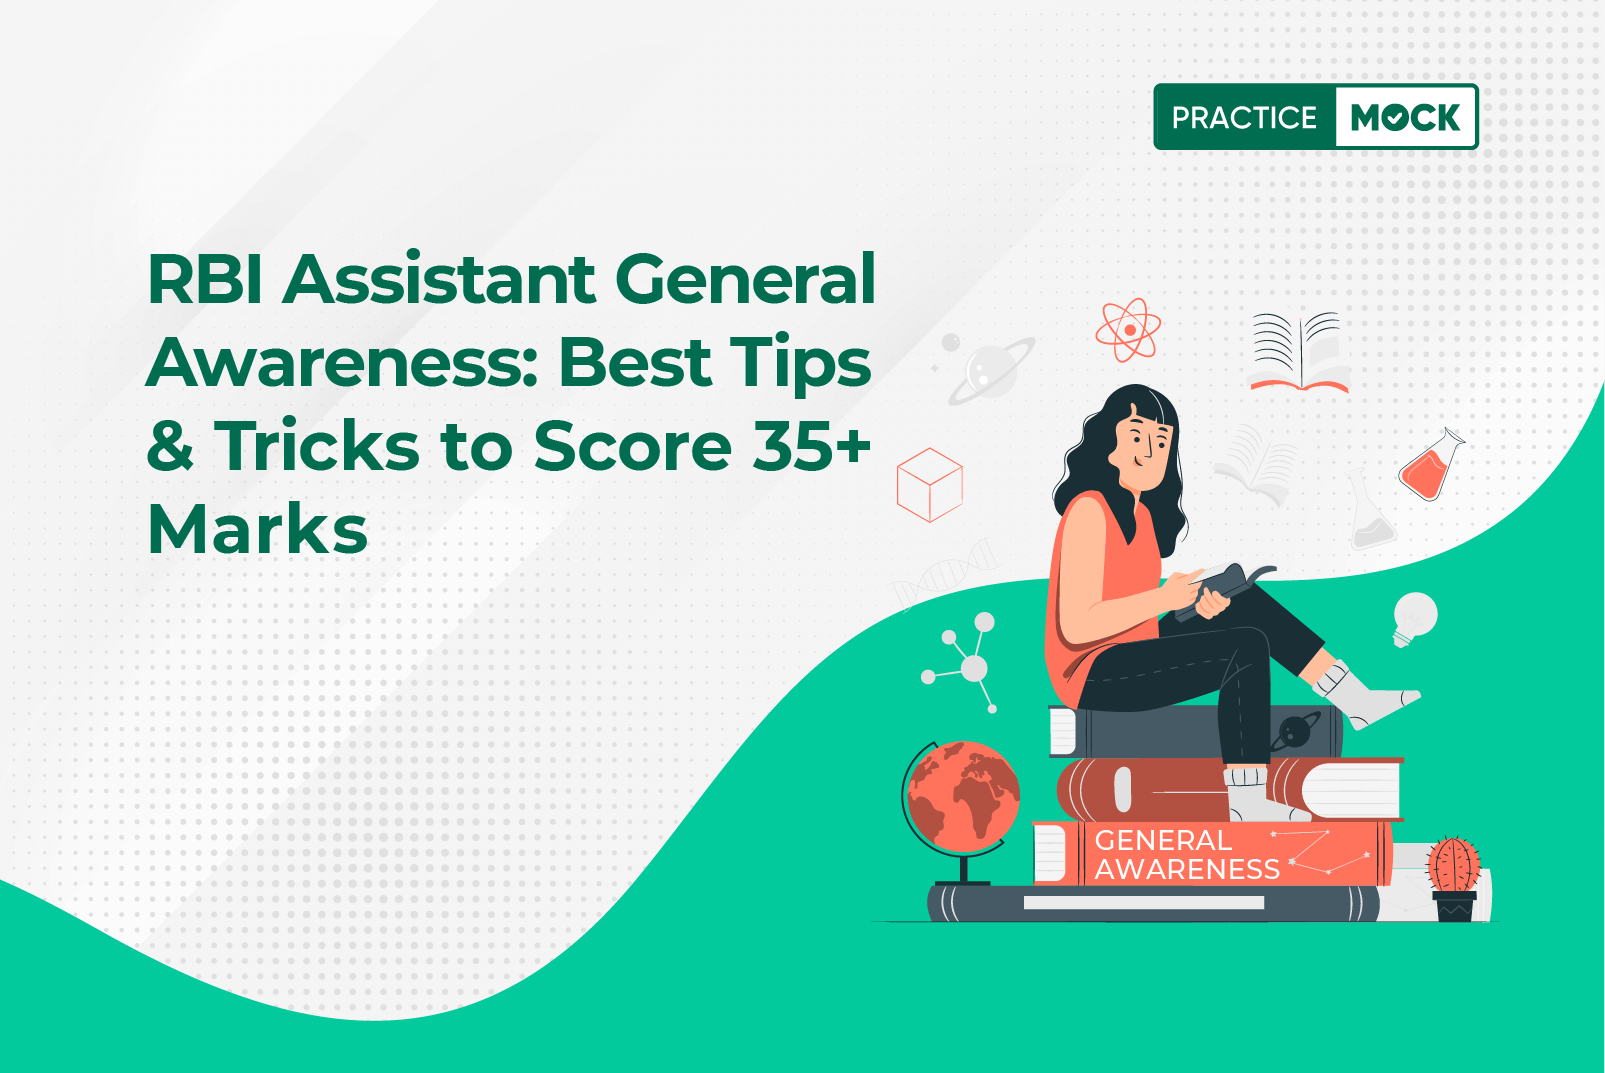 RBI Assistant General Awareness Best Tips & Tricks to Score 35+ Marks